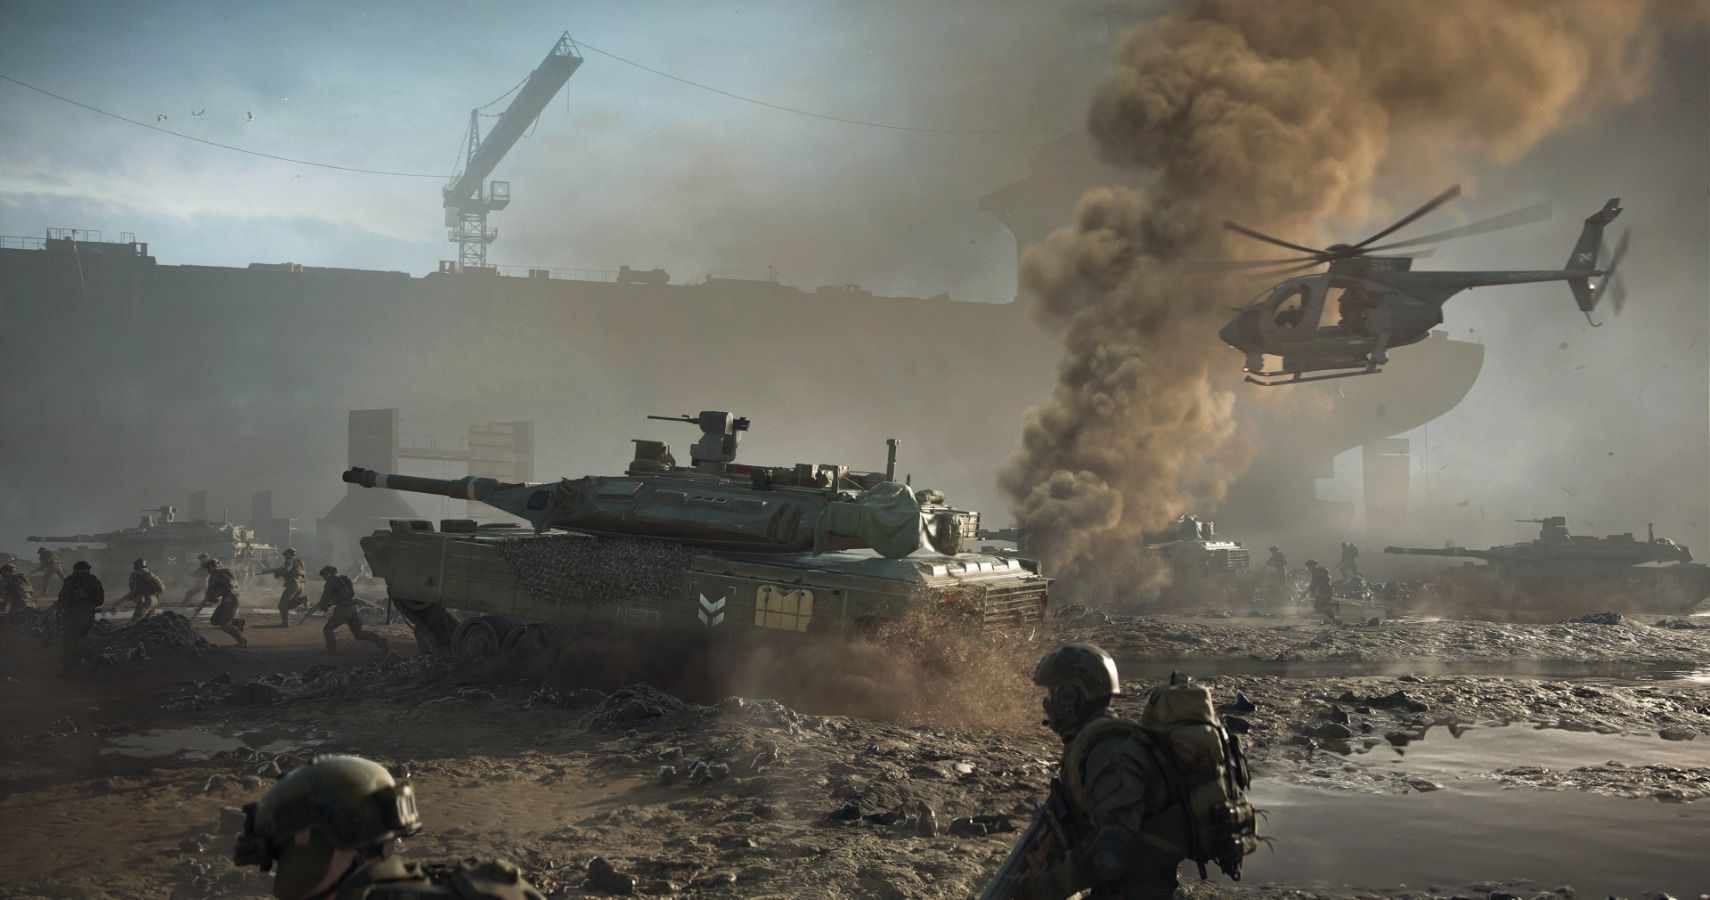 A tank drives across a smoky warfront and a helicopter hovers nearby in Battlefield 2042